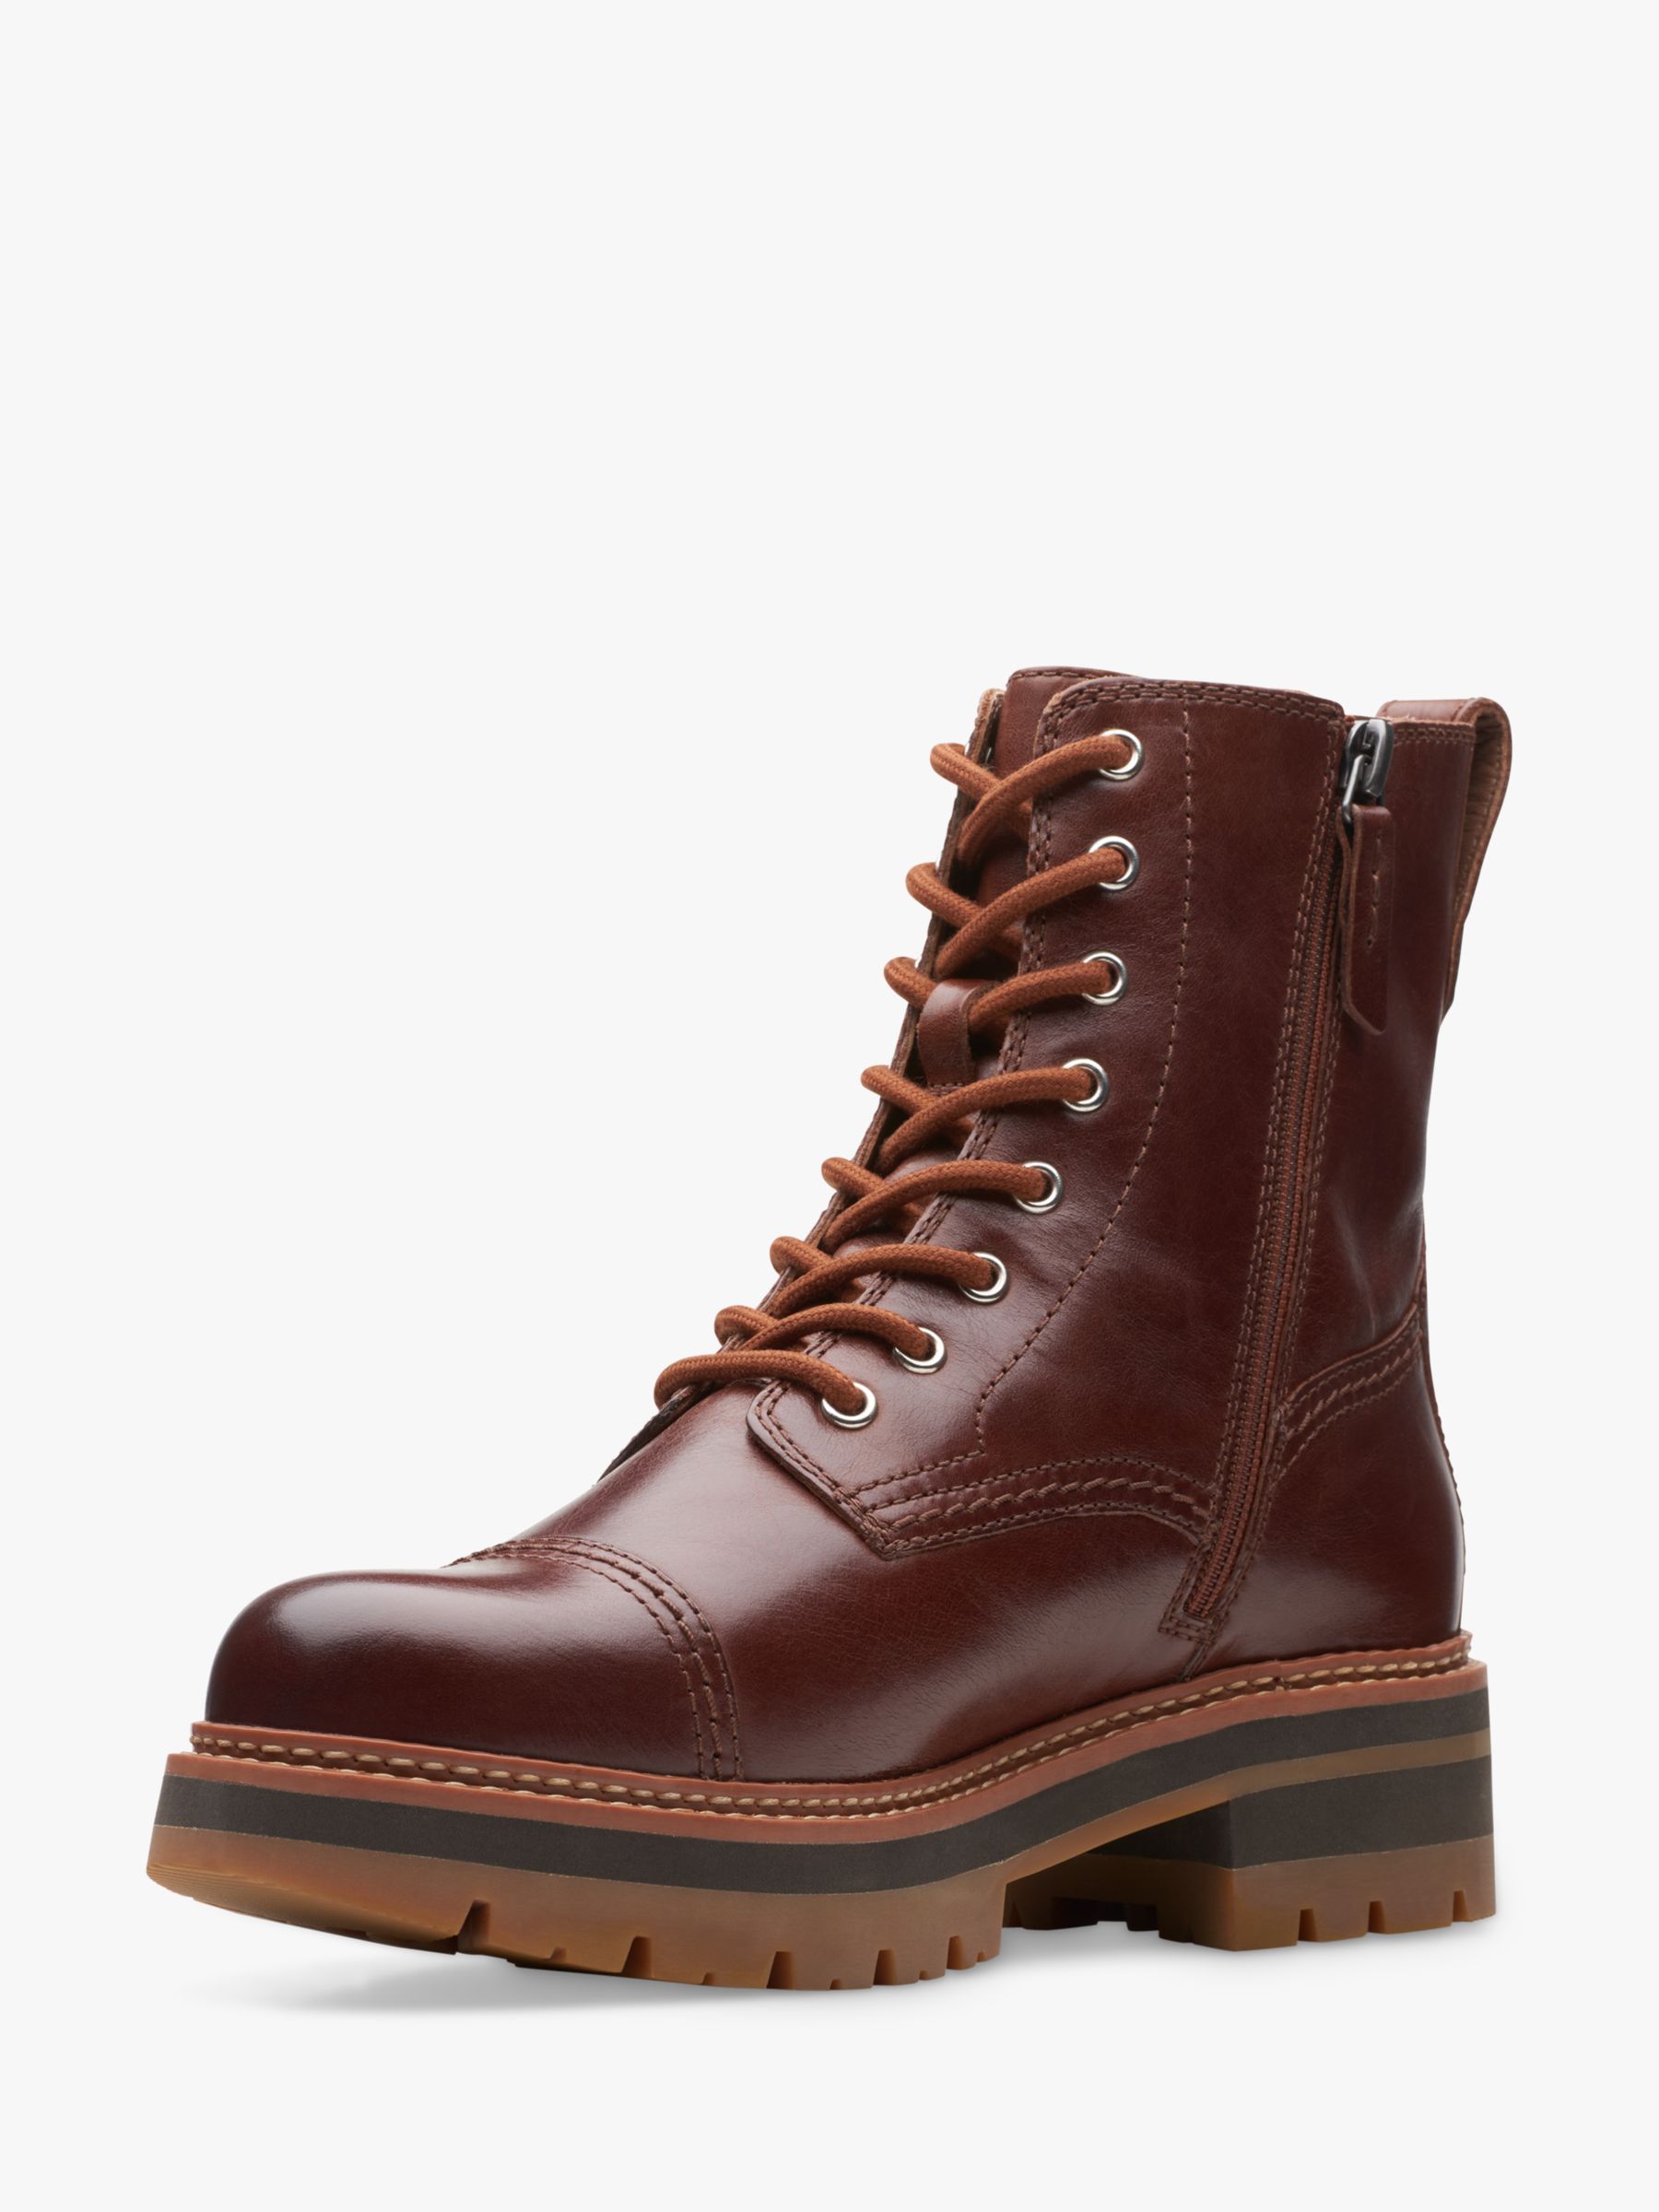 Clarks Orianna Cap Leather Lace Up Biker Boots, Tan at John Lewis ...